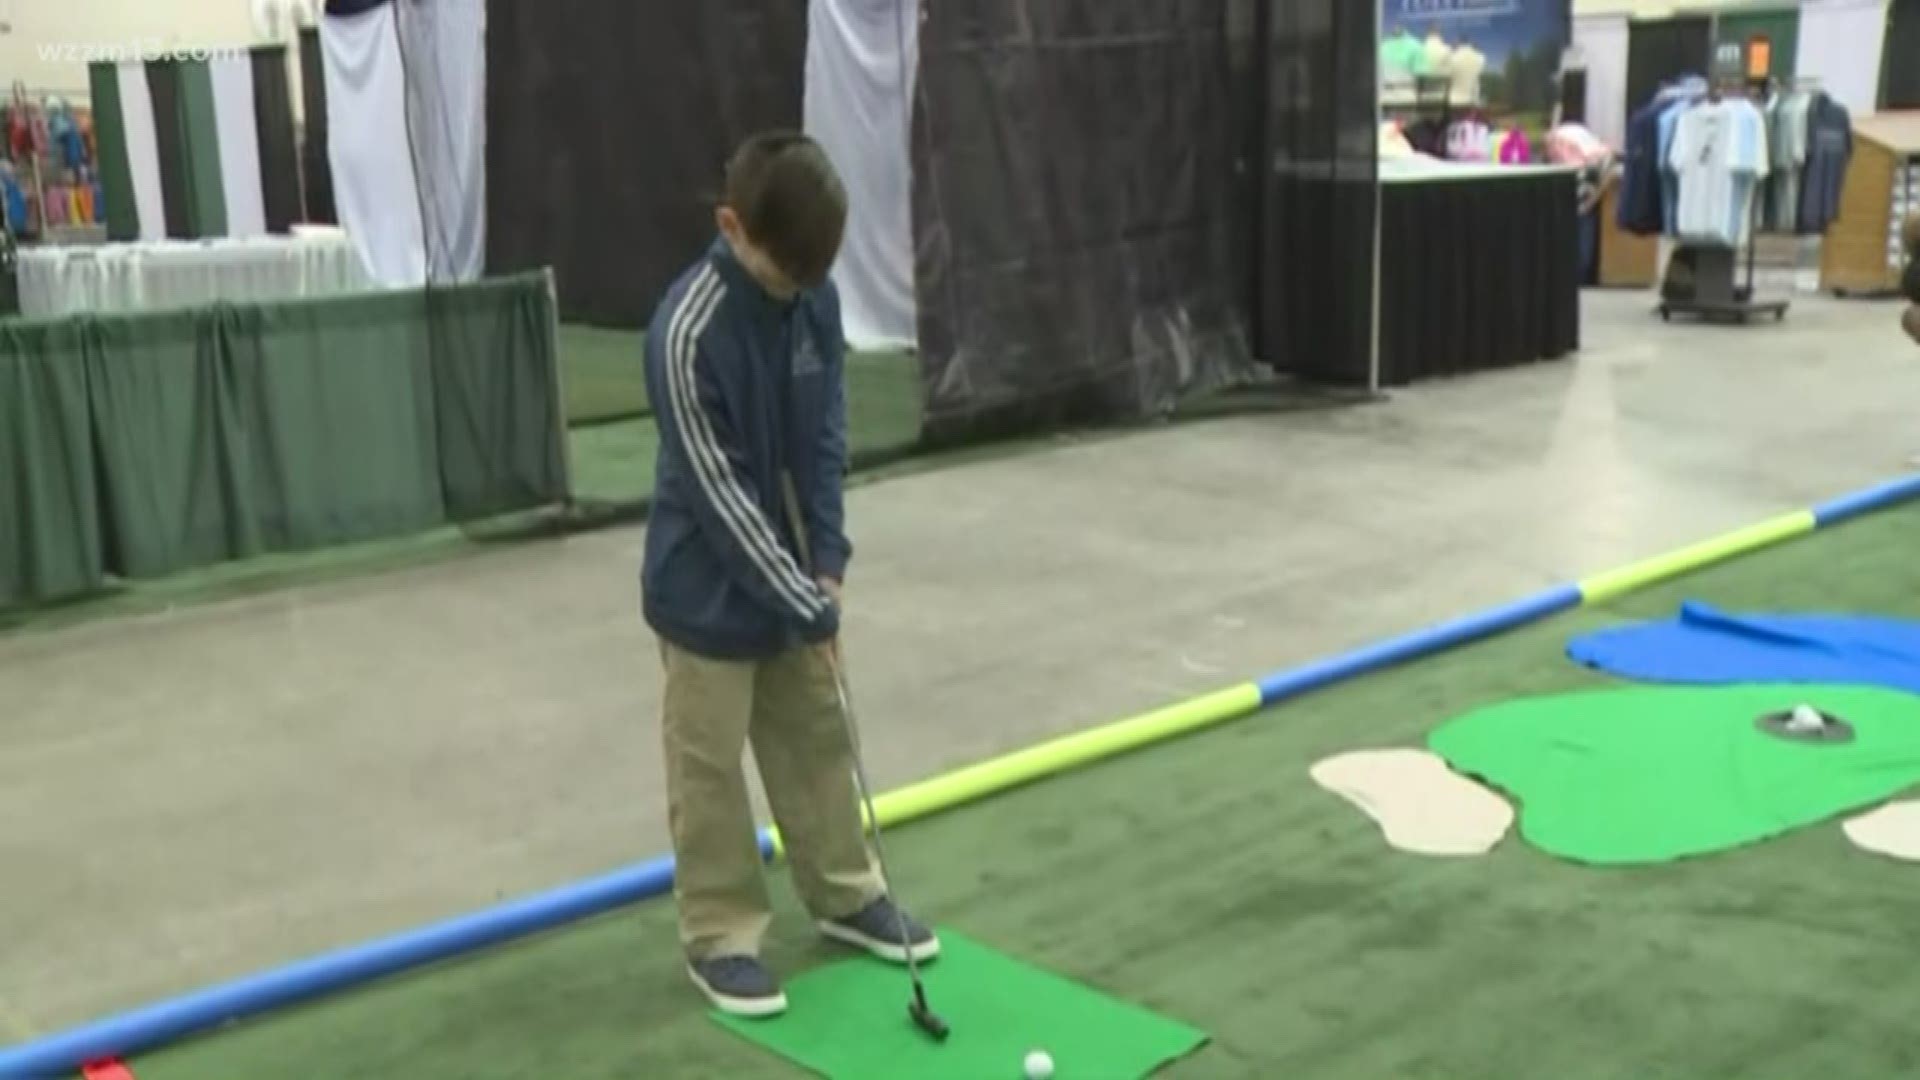 At the West Michigan Golf Show, there's a program dedicated to teaching kids and teens life skills through golf.